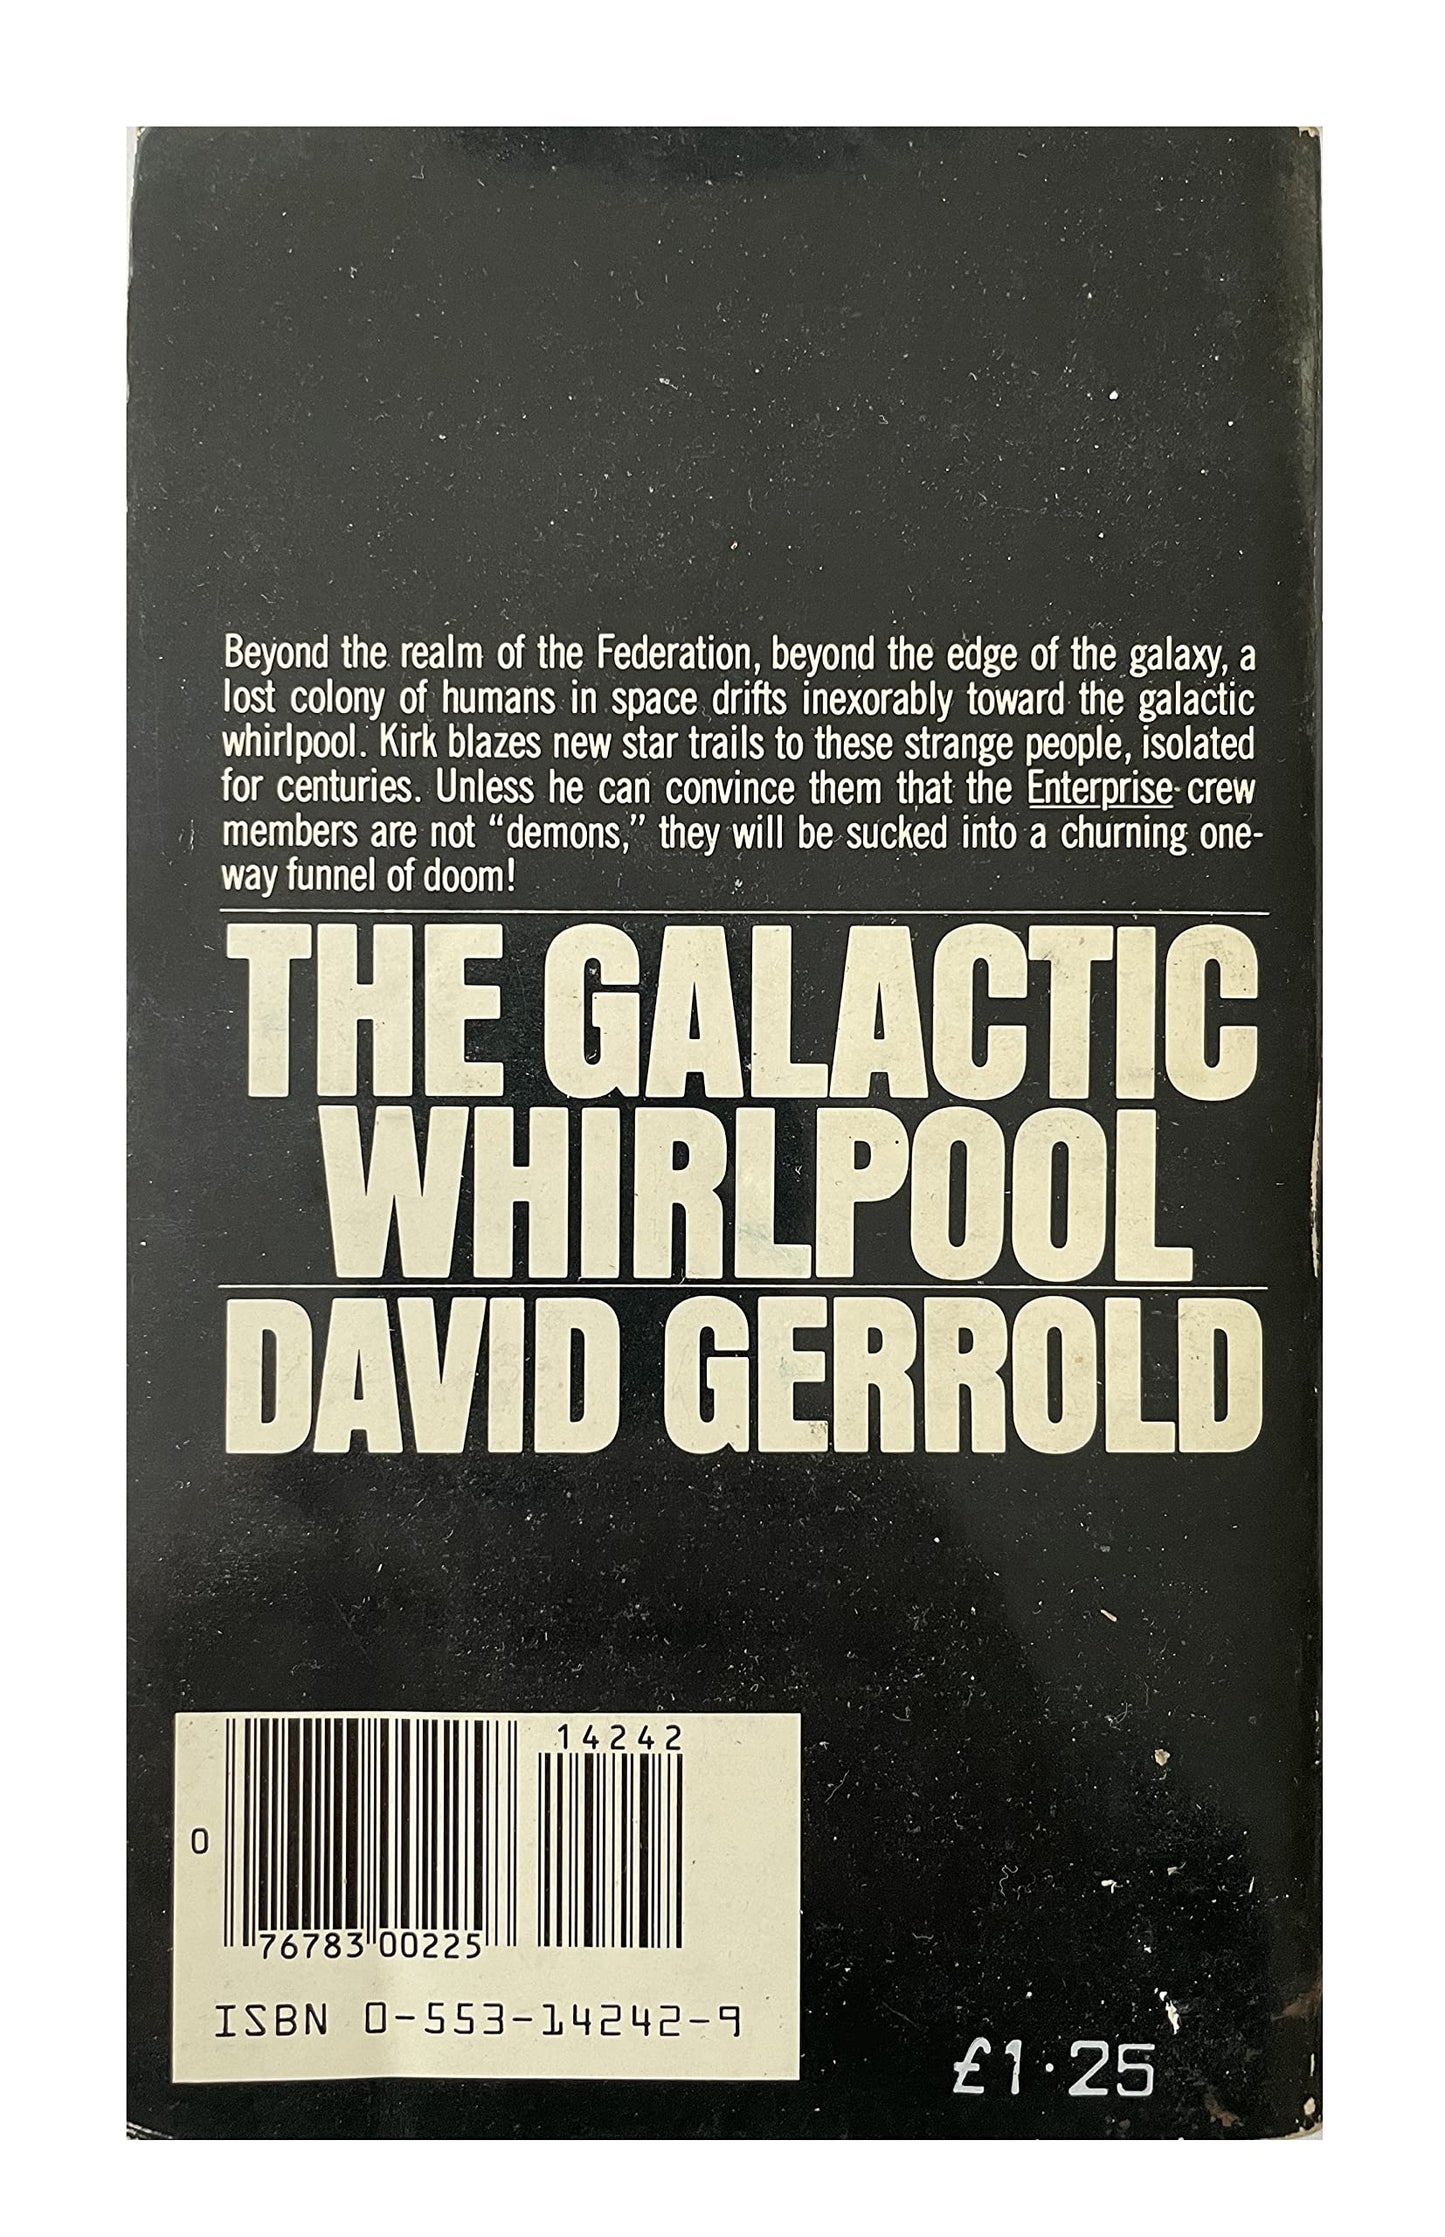 Vintage 1980 More Spectacular Star Trek Adventures - The Galactic Whirlpool - Paperback Book - By David Gerpold